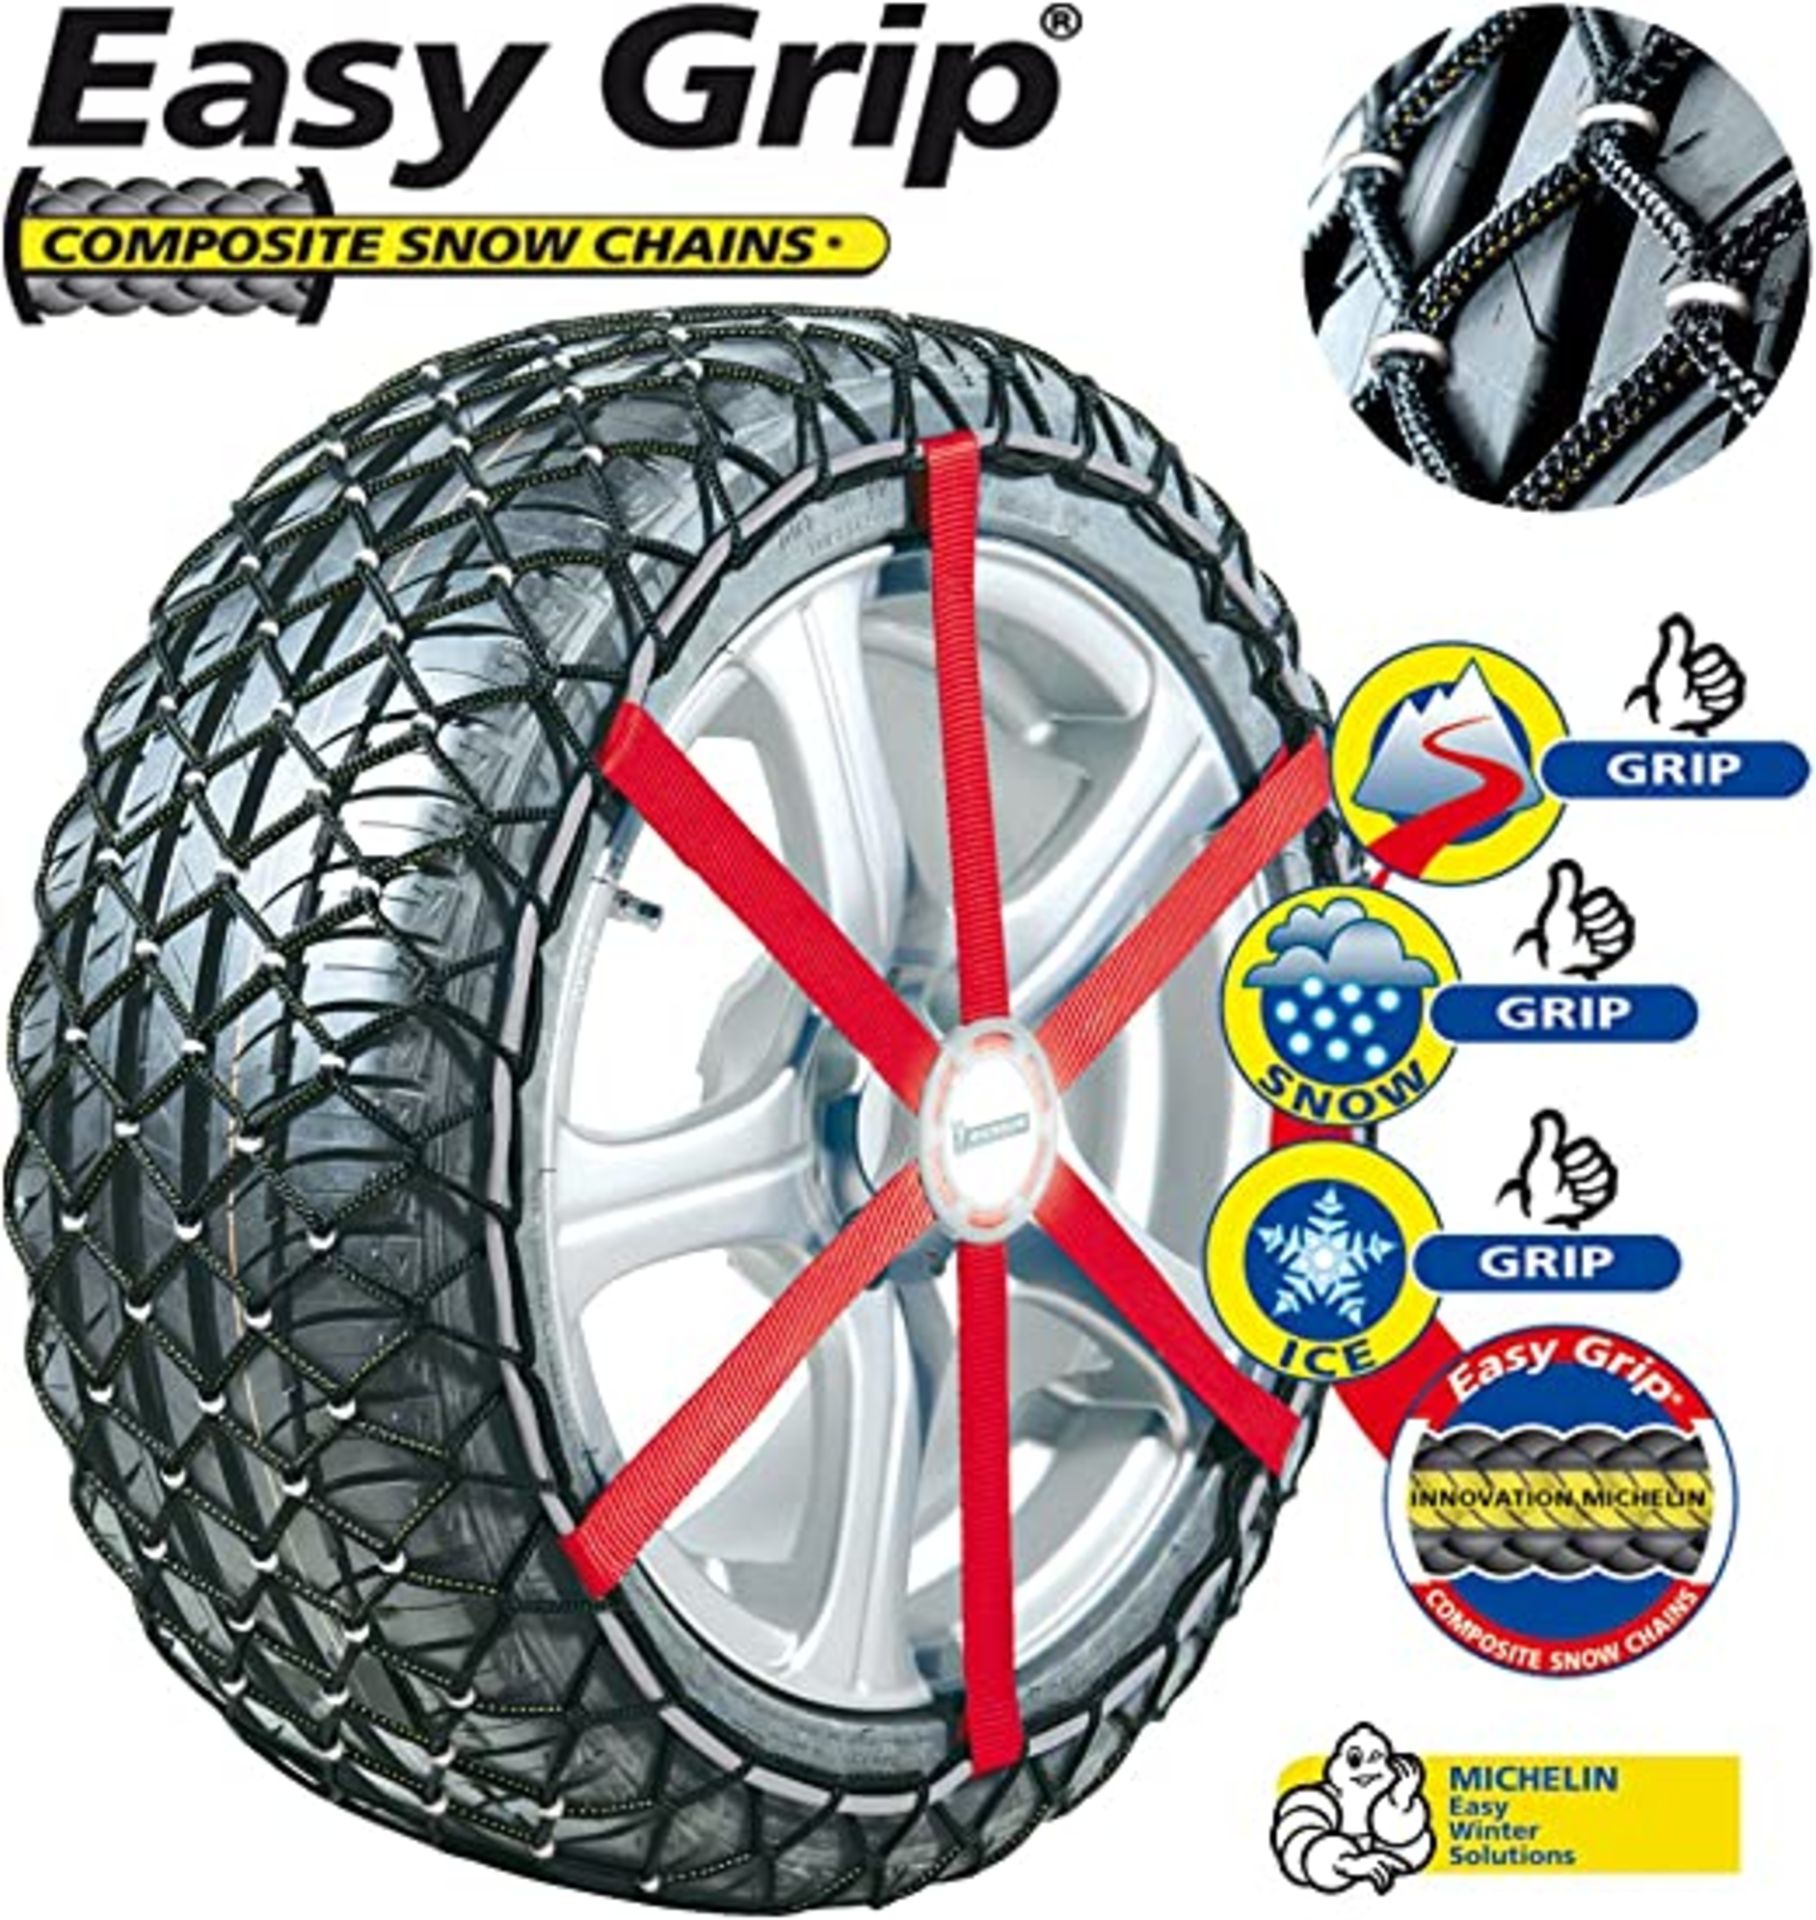 5 X NEW PACKAGED SETS OF Michelin Snow Sock Easy Grip R12. RRP £85.95 EACH. The Michelin Easy Grip - Image 2 of 4